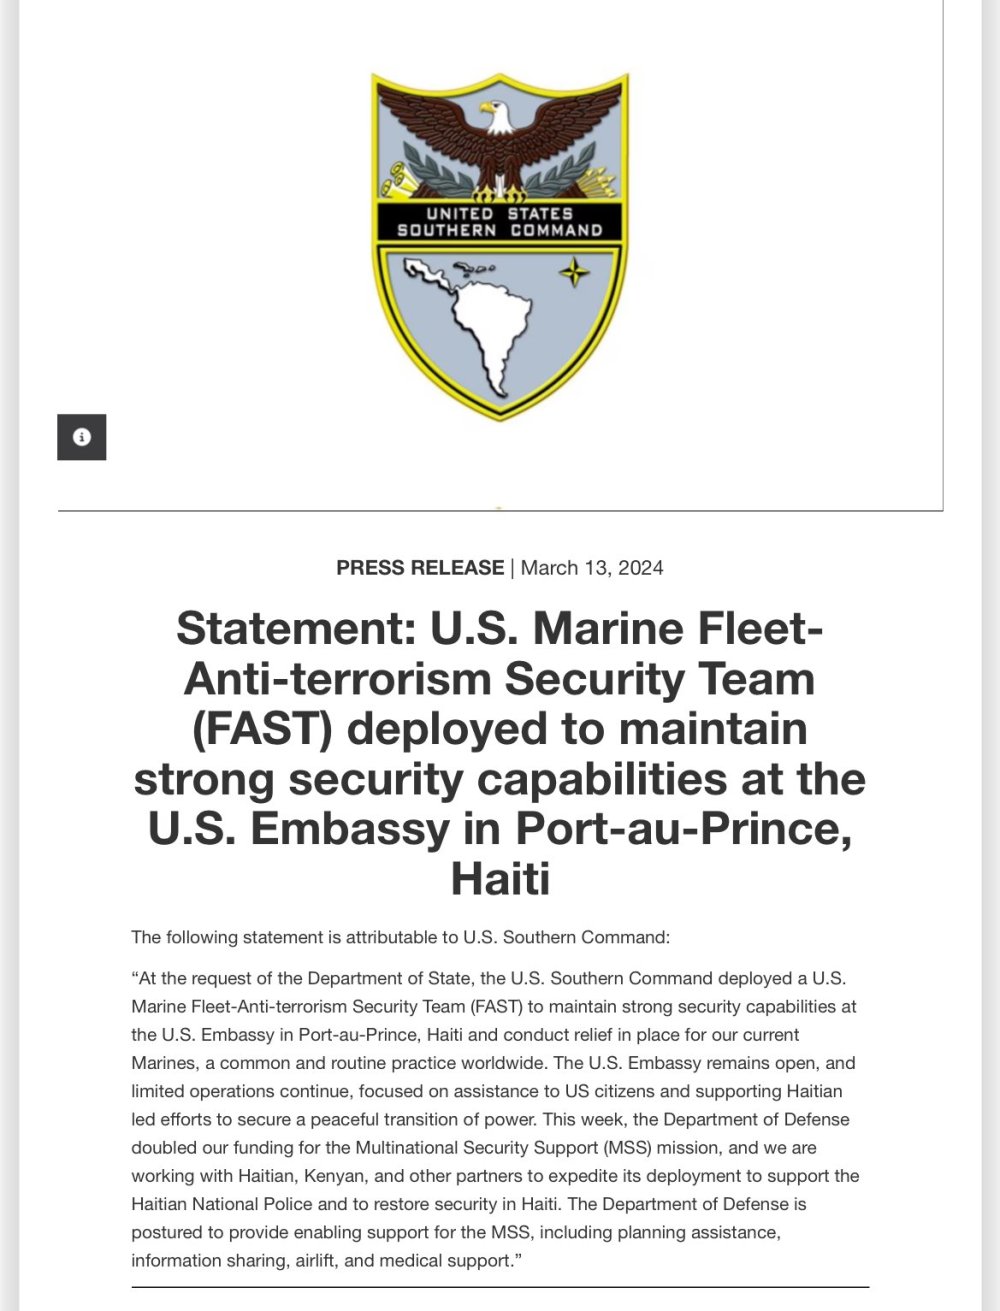 Statement of US Southern Command deploying an elite unit of US Marines to Port-au-Prince, Haiti, on March 13.